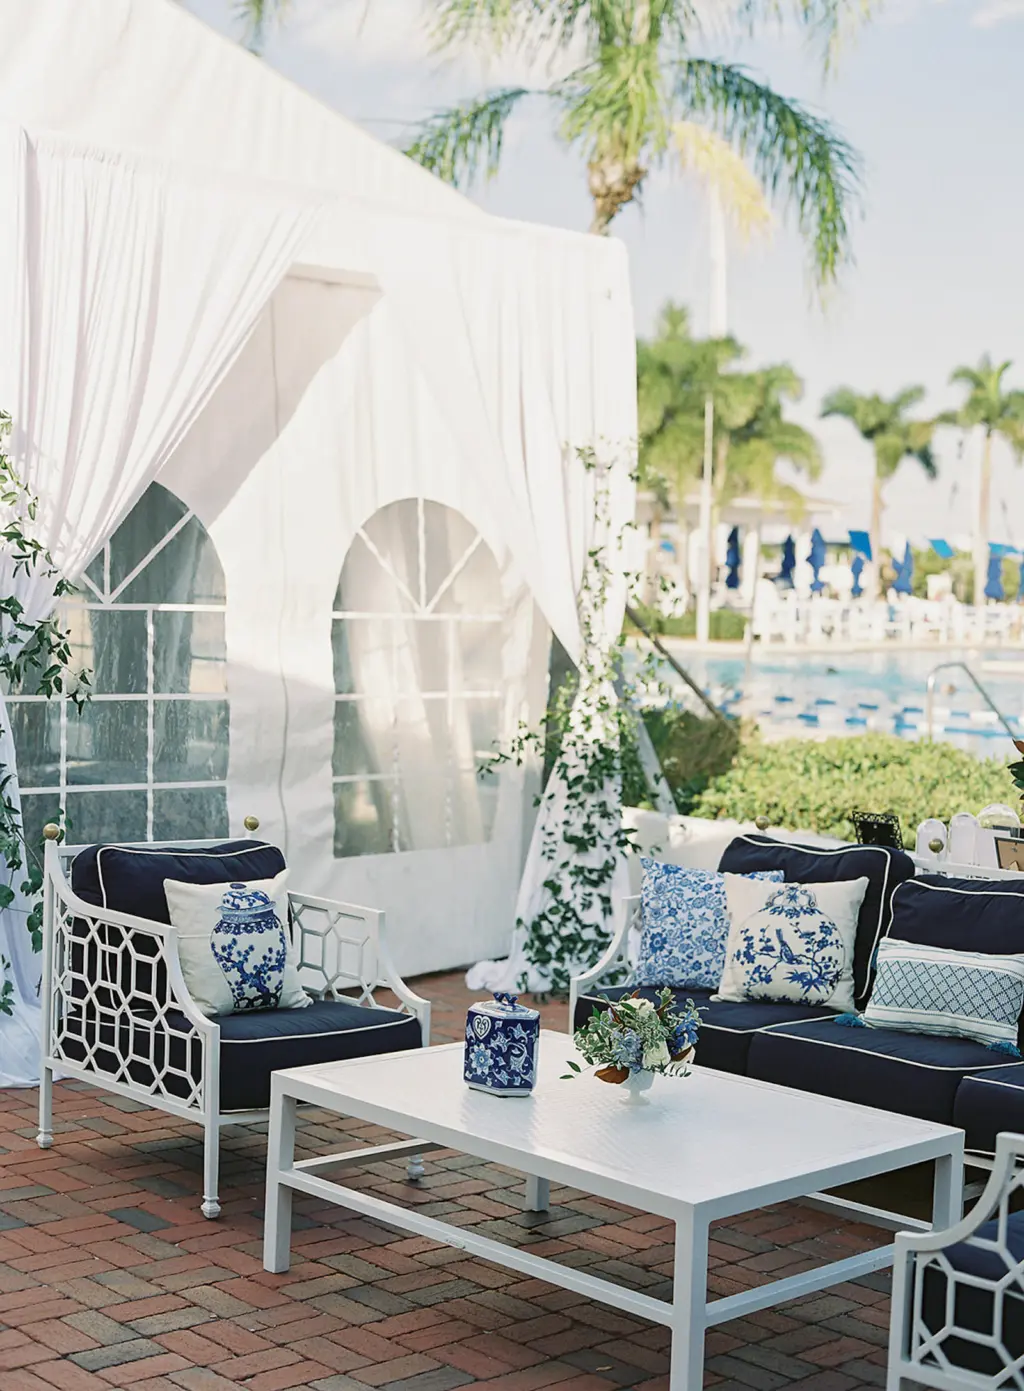 Elegant White and Navy Lounge Chairs for Cocktail Hour | Old Florida Wedding Reception Decor Inspiration